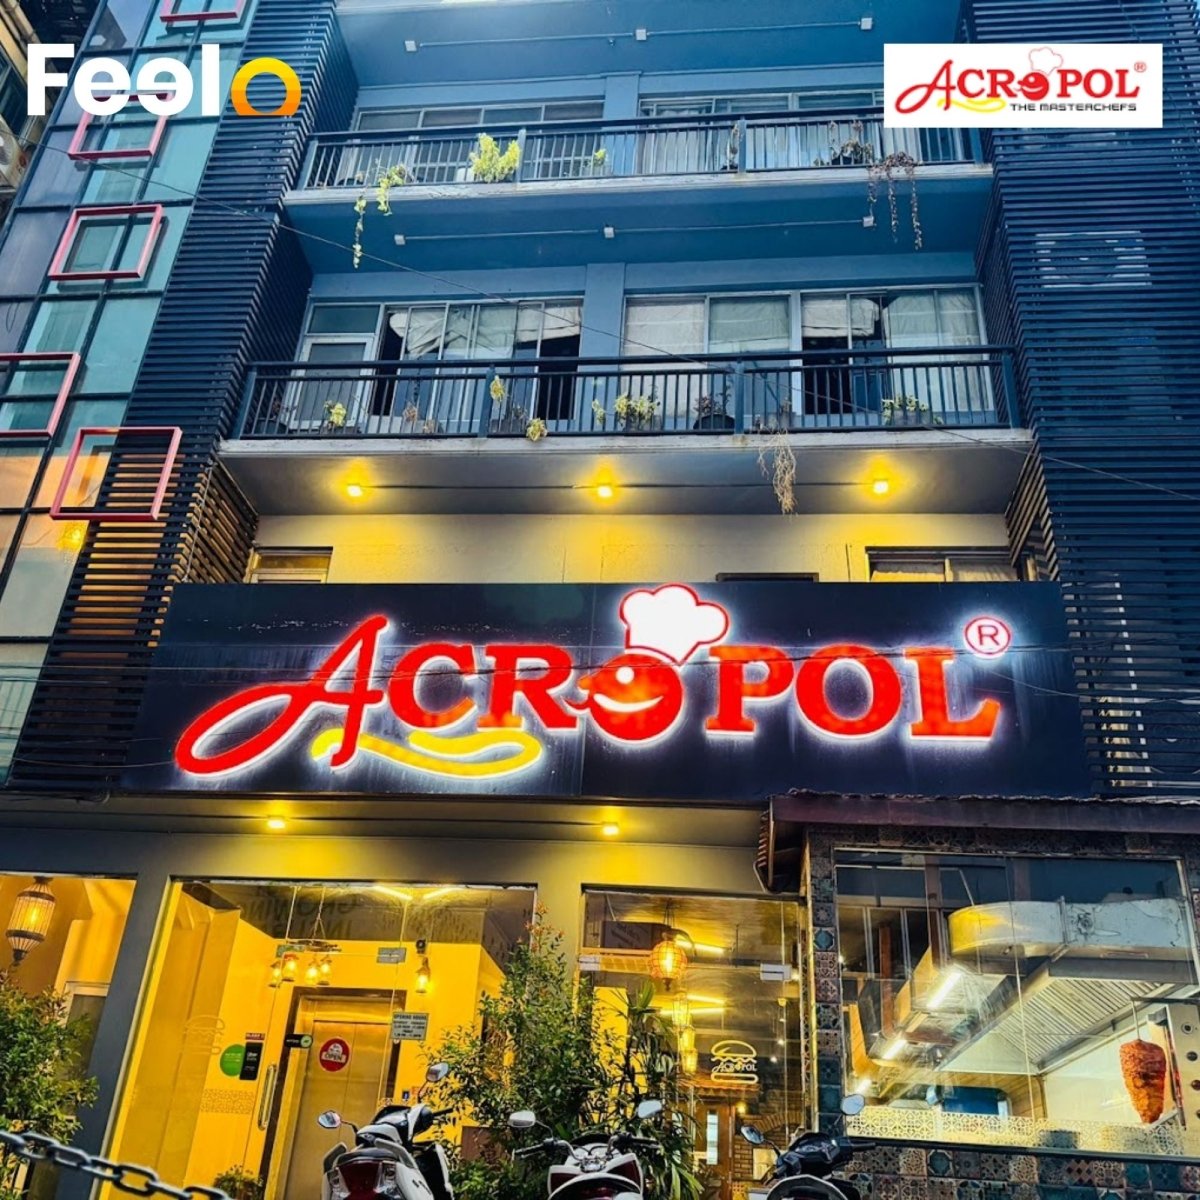 1x Chicken Kurma with Indian parata for 2 people - Acropol Restaurant, Colombo 03 | Feelo